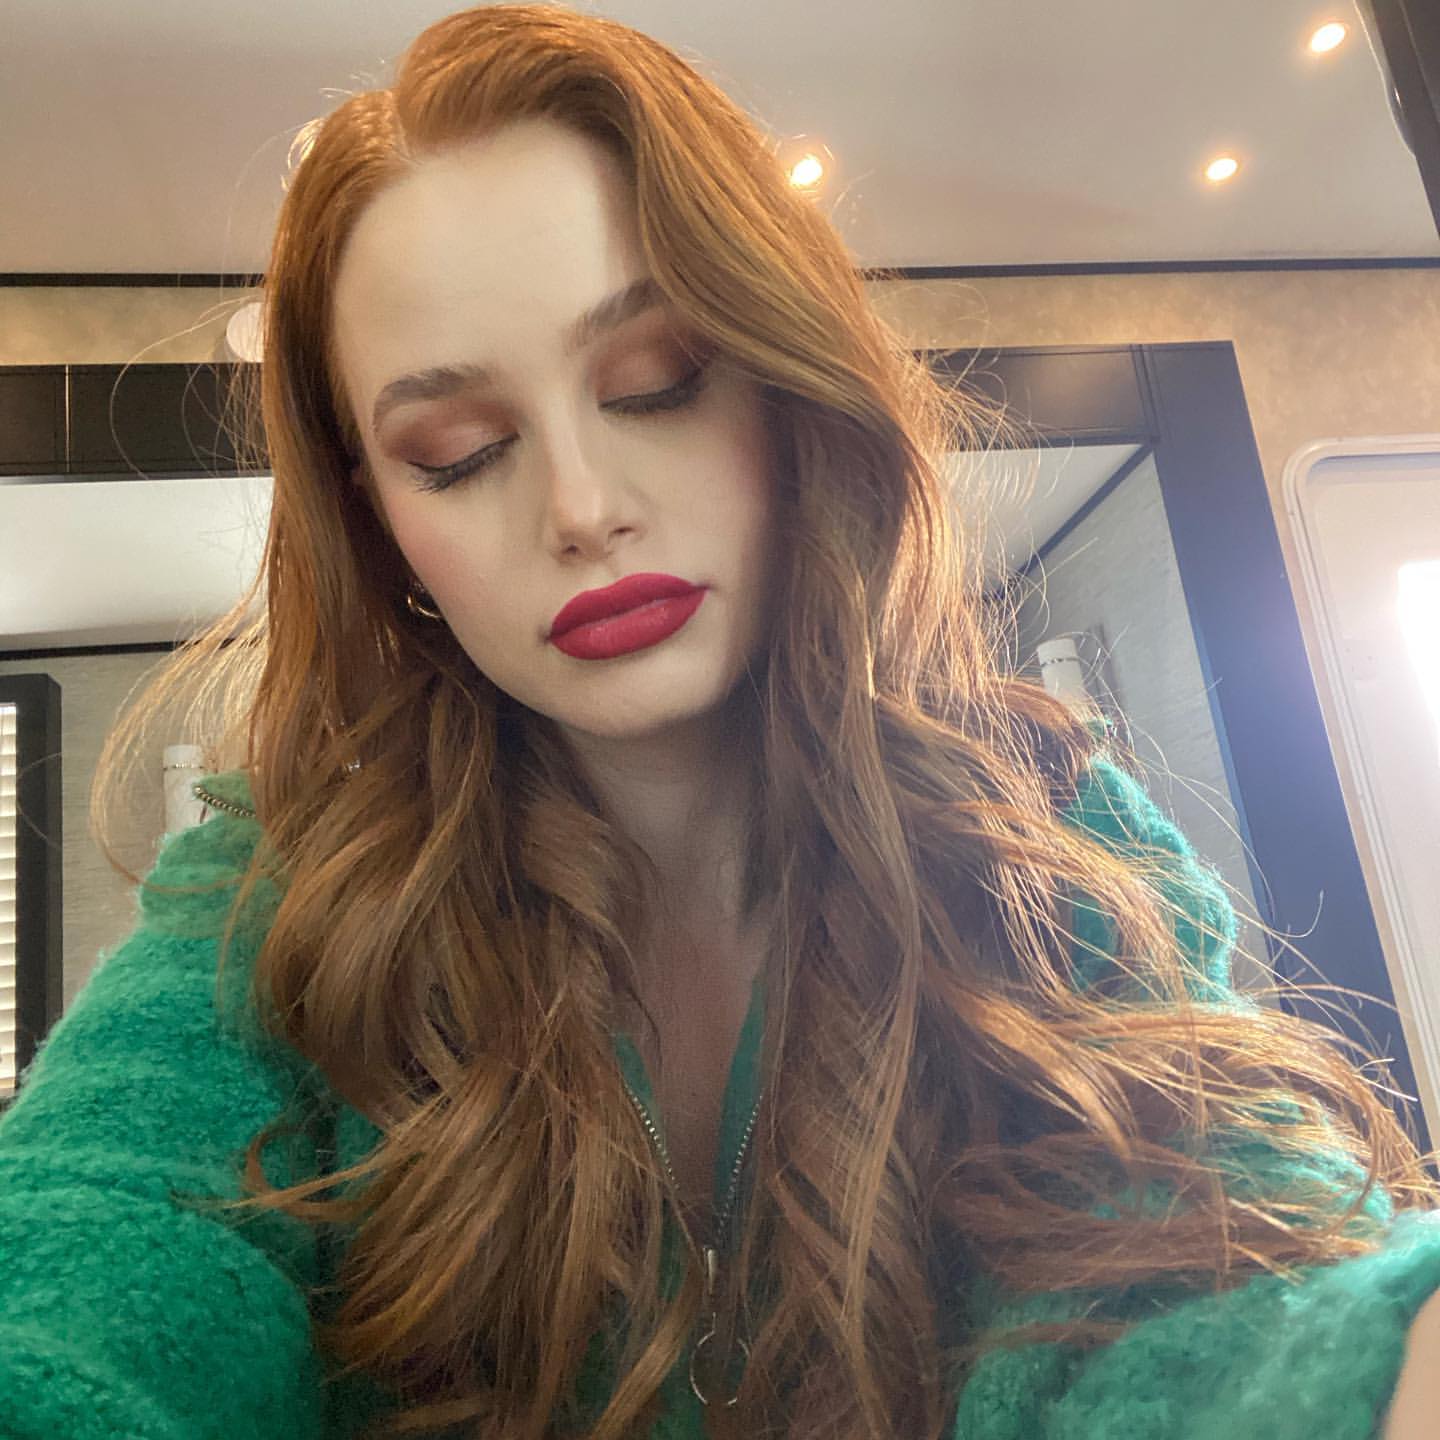 Fotos n°1 : Madelaine Petsch Works Out!